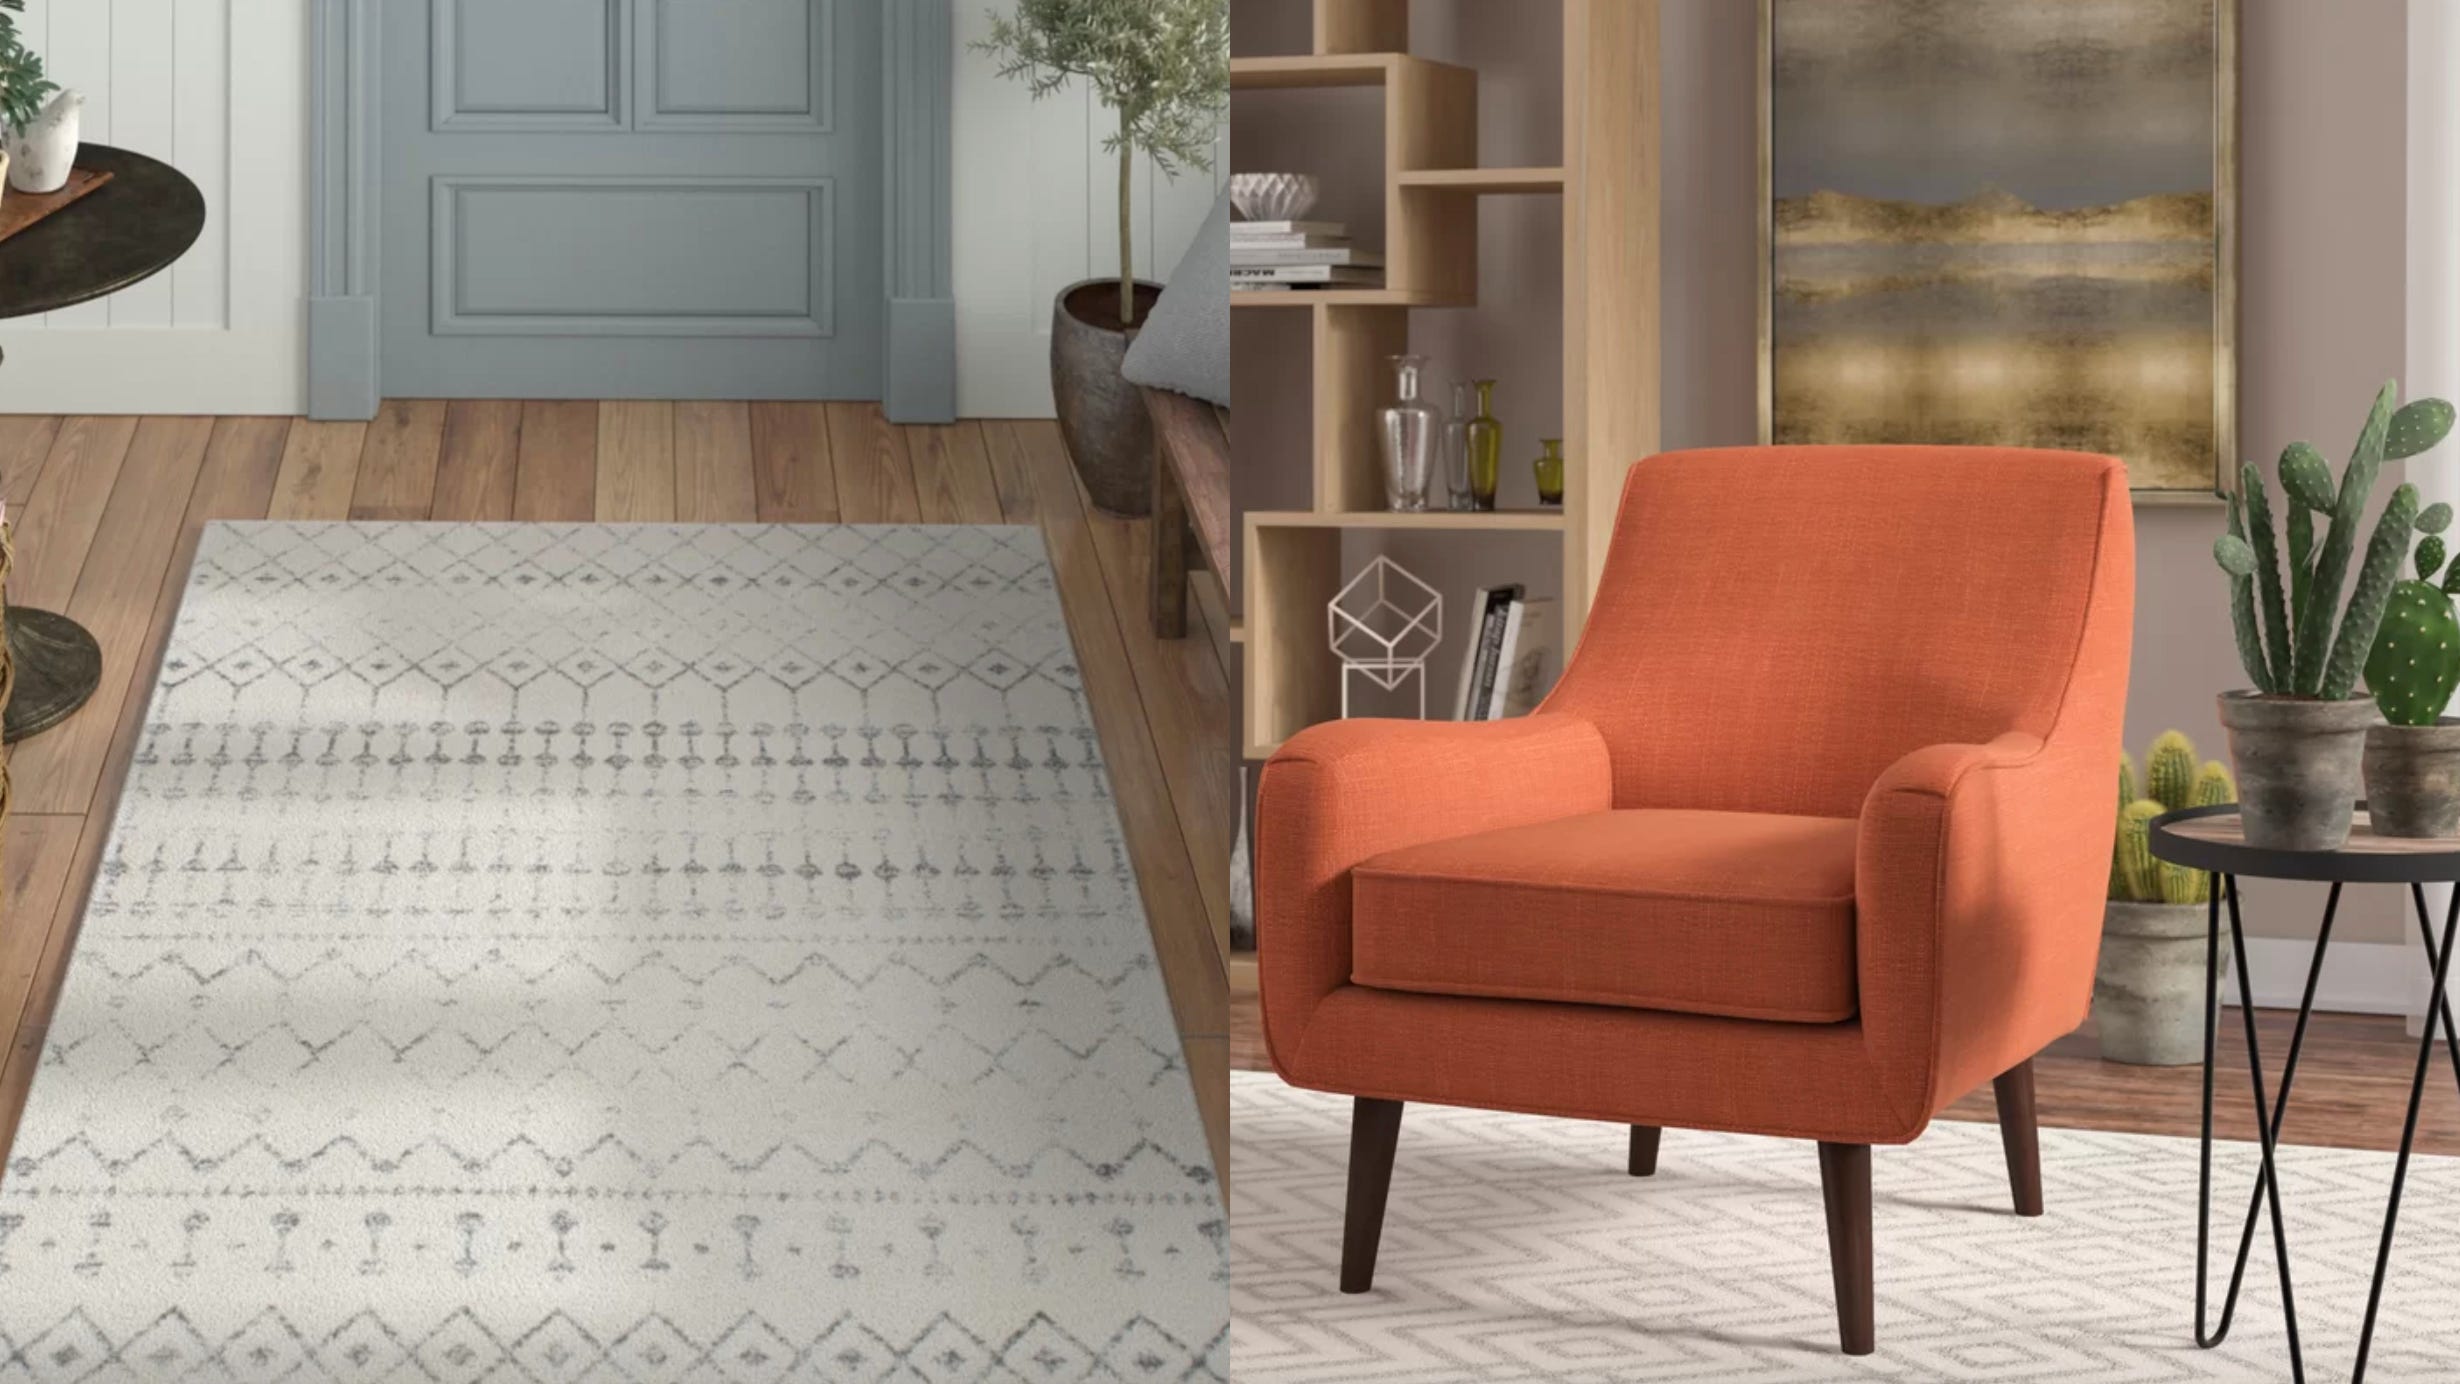 The Best Deals You Can Get From Wayfairs Big Living Room Sale